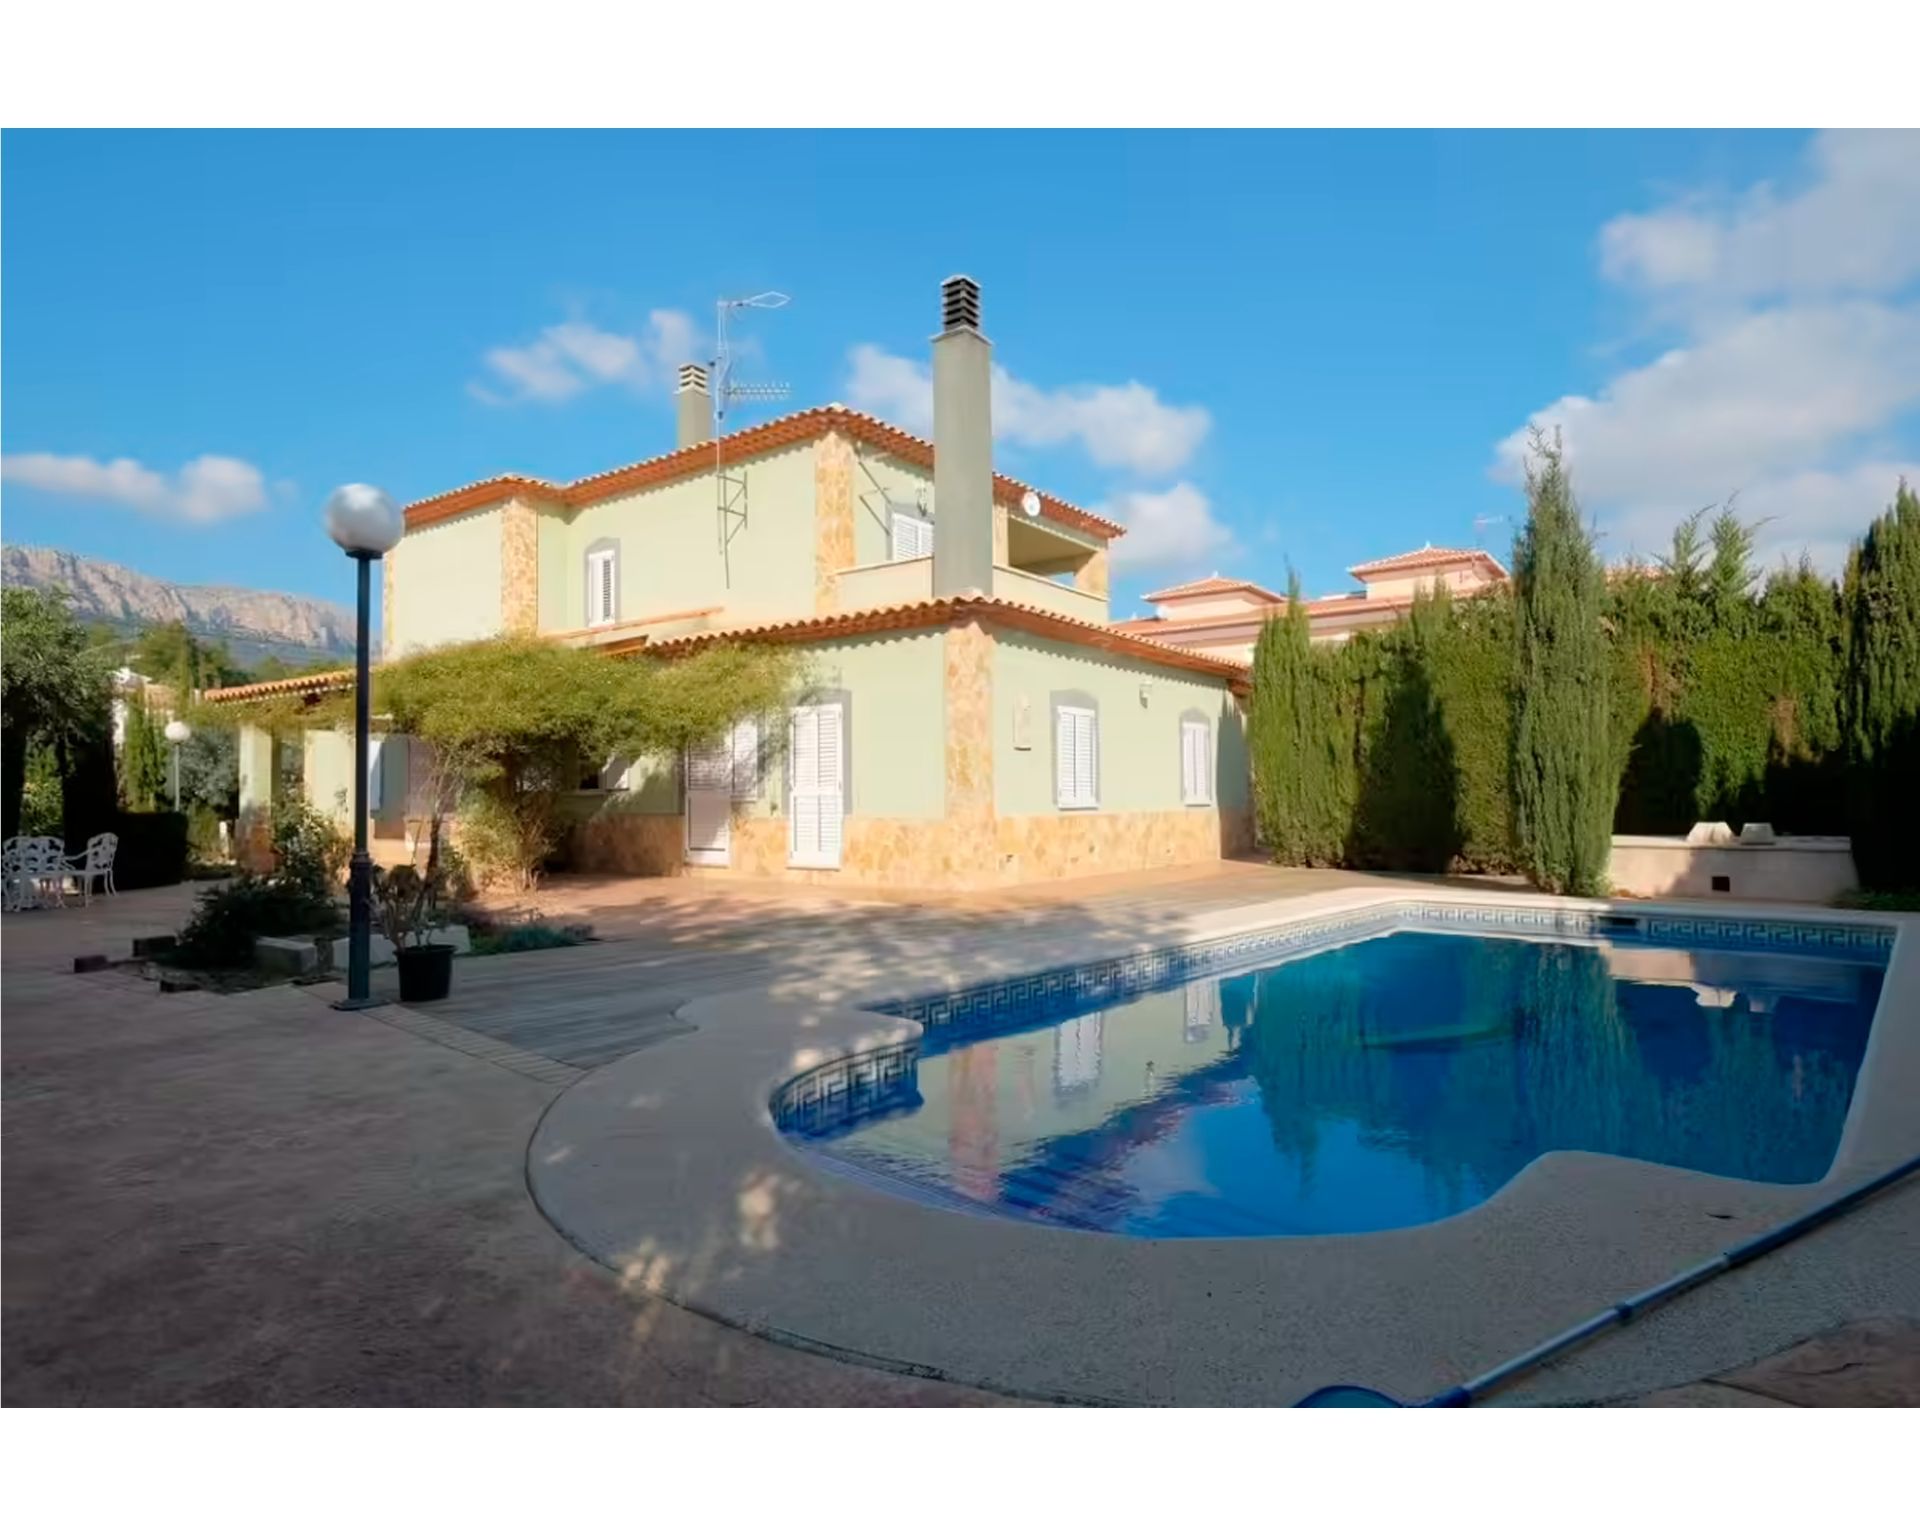 Magnificent independent villa with garden and pool